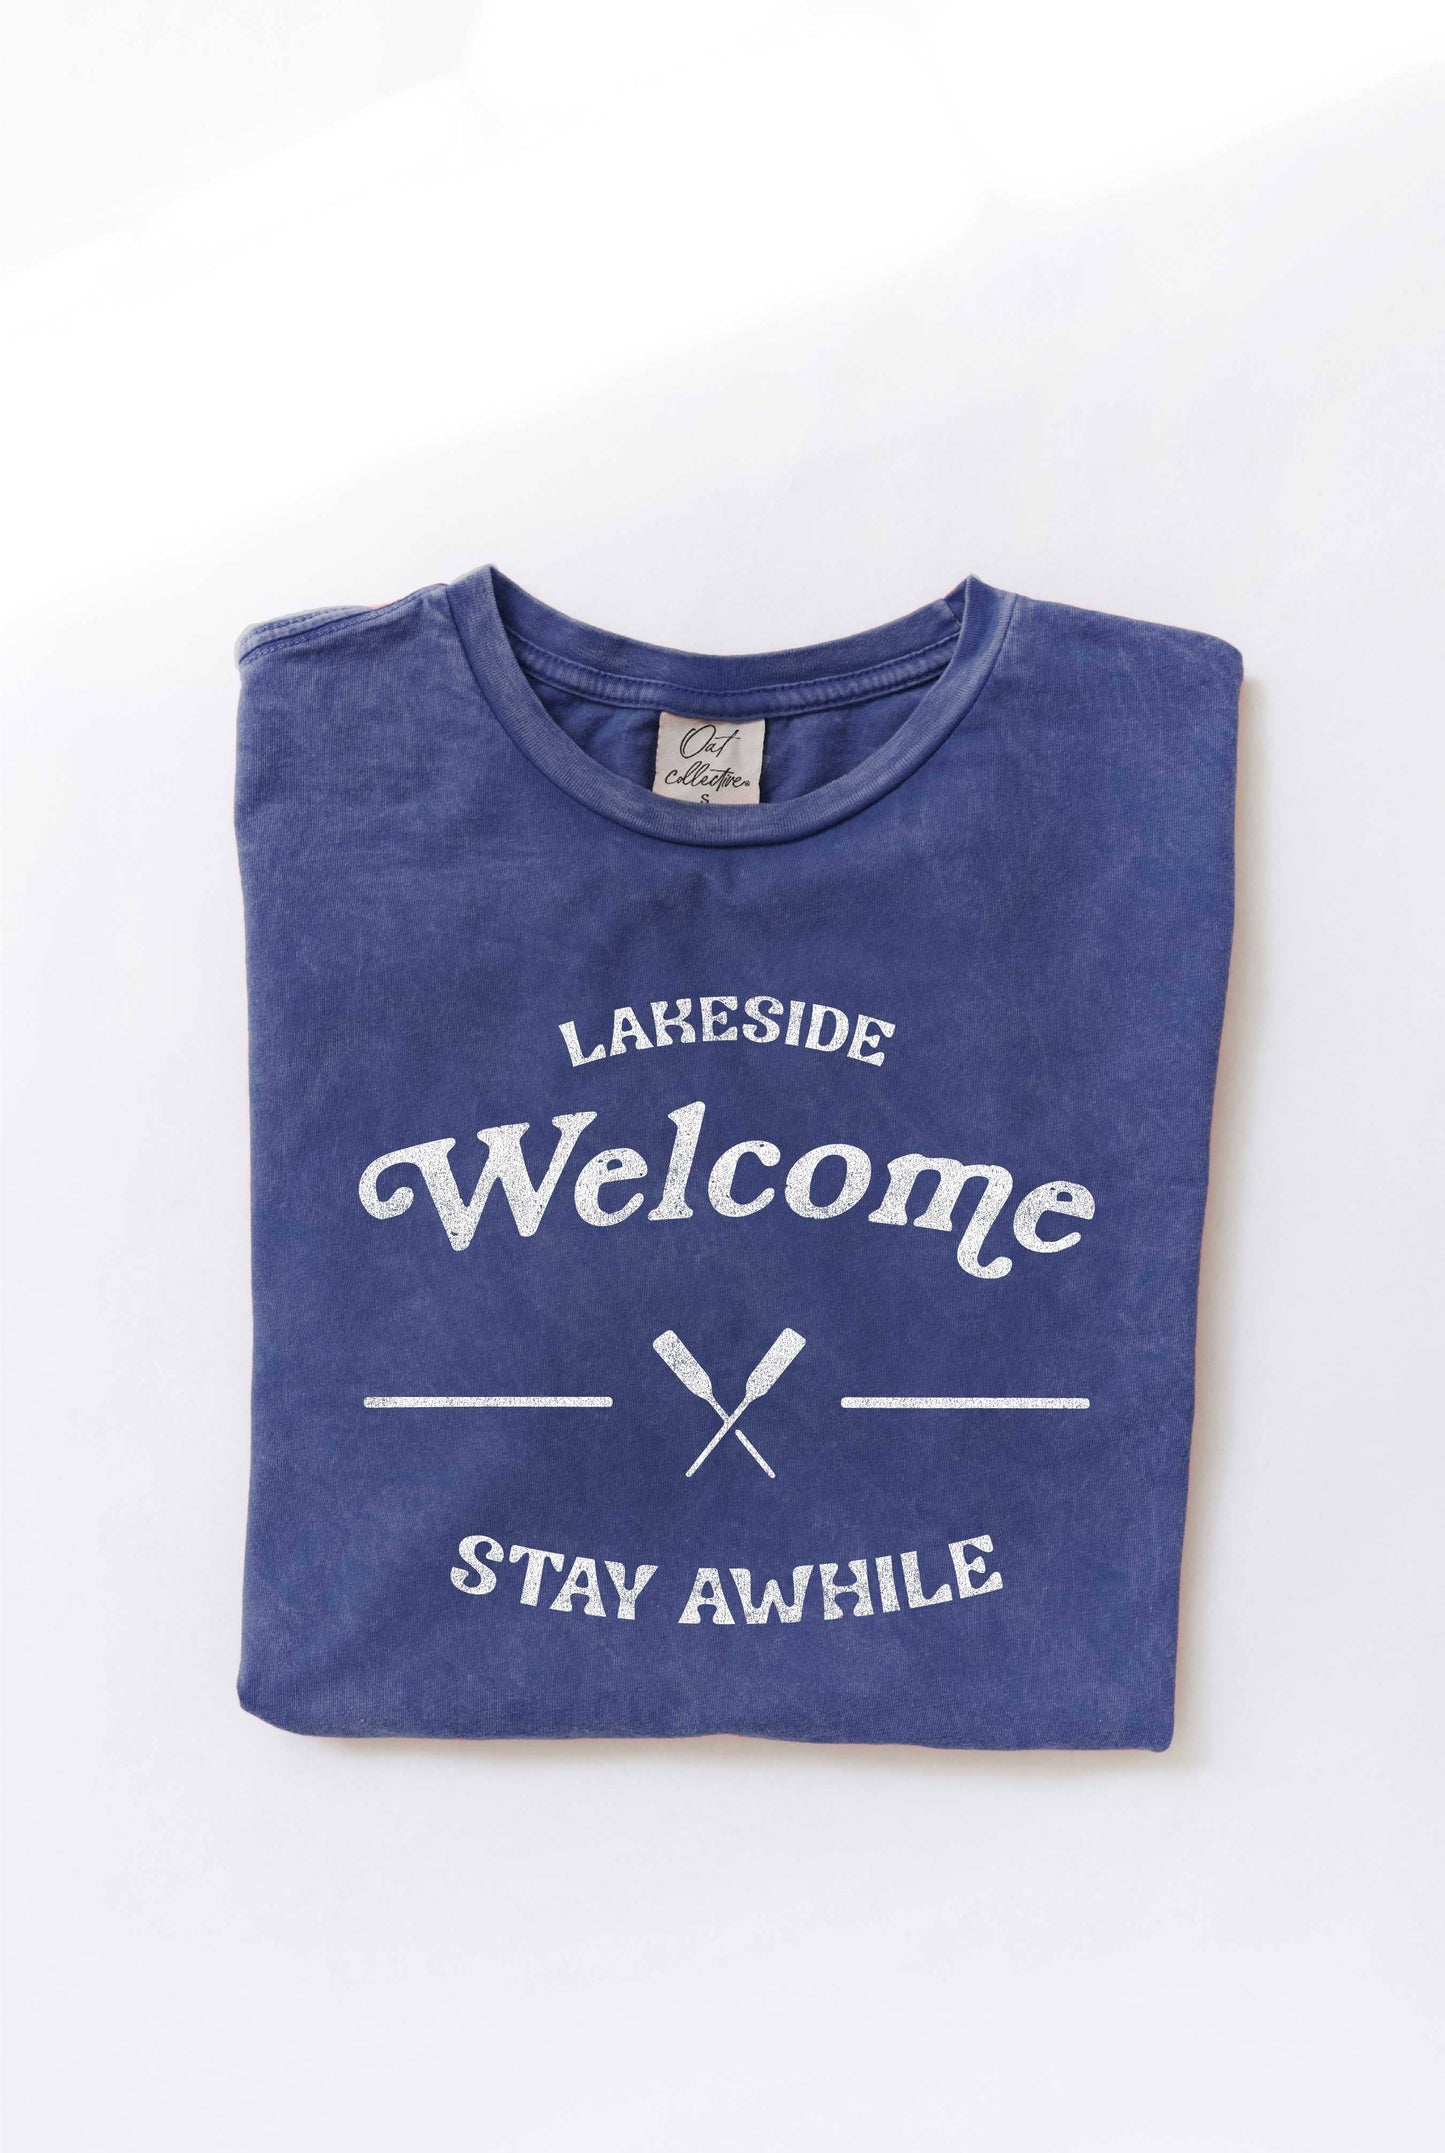 LAKESIDE WELCOME STAY AWHILE Mineral Washed Graphic Top